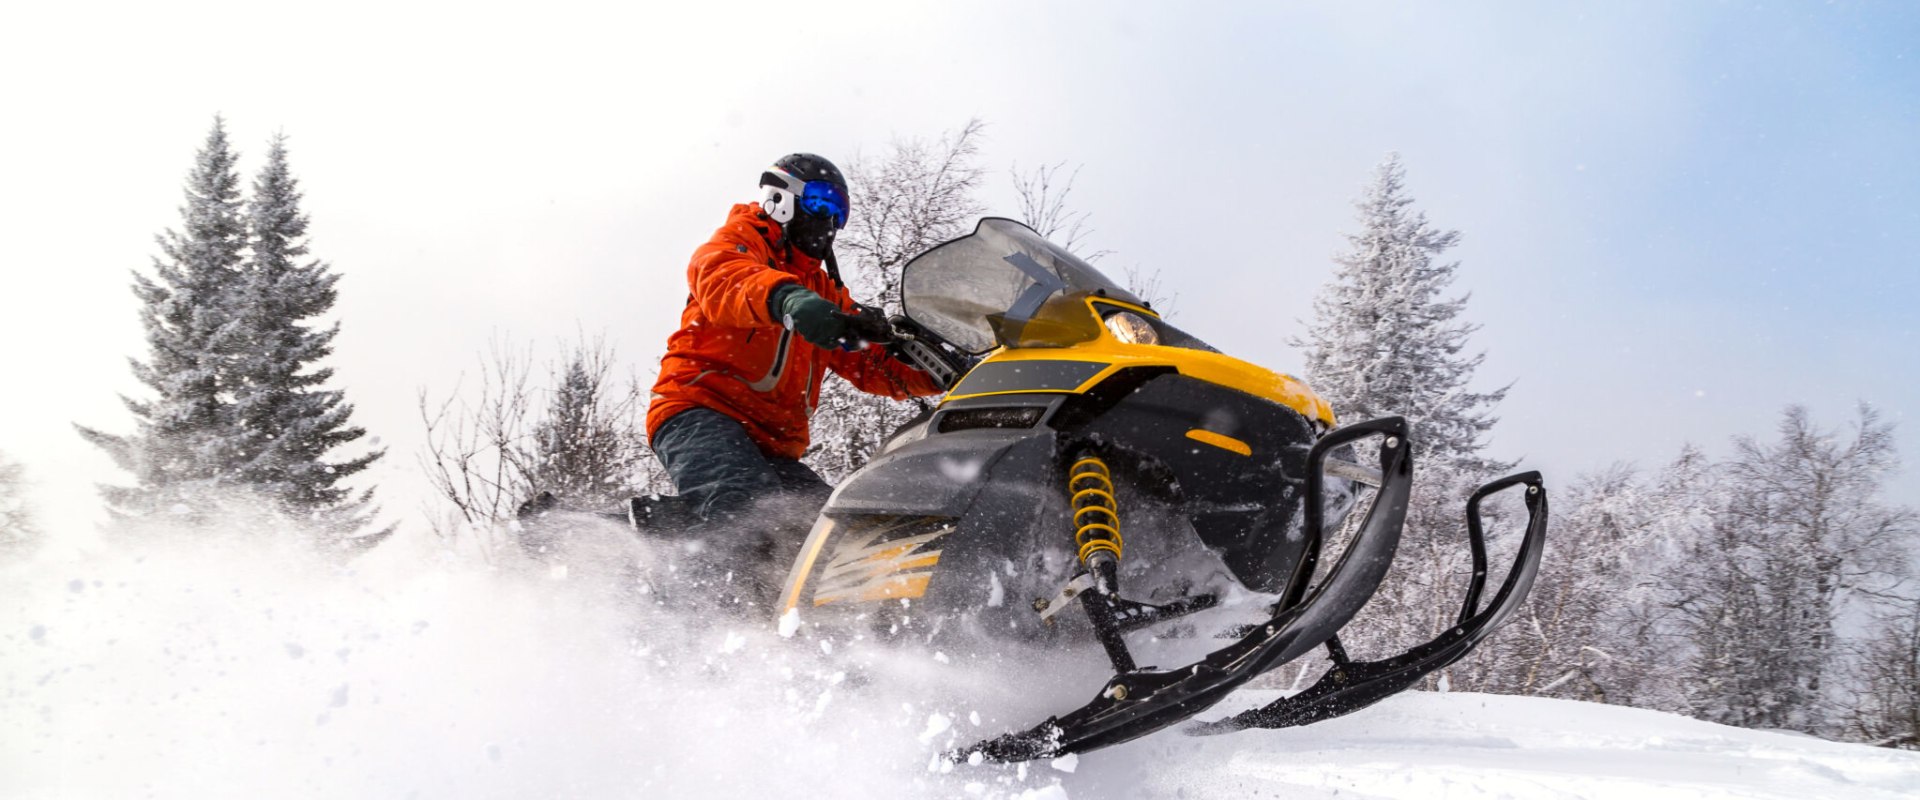 What is the best selling snowmobile of all time?